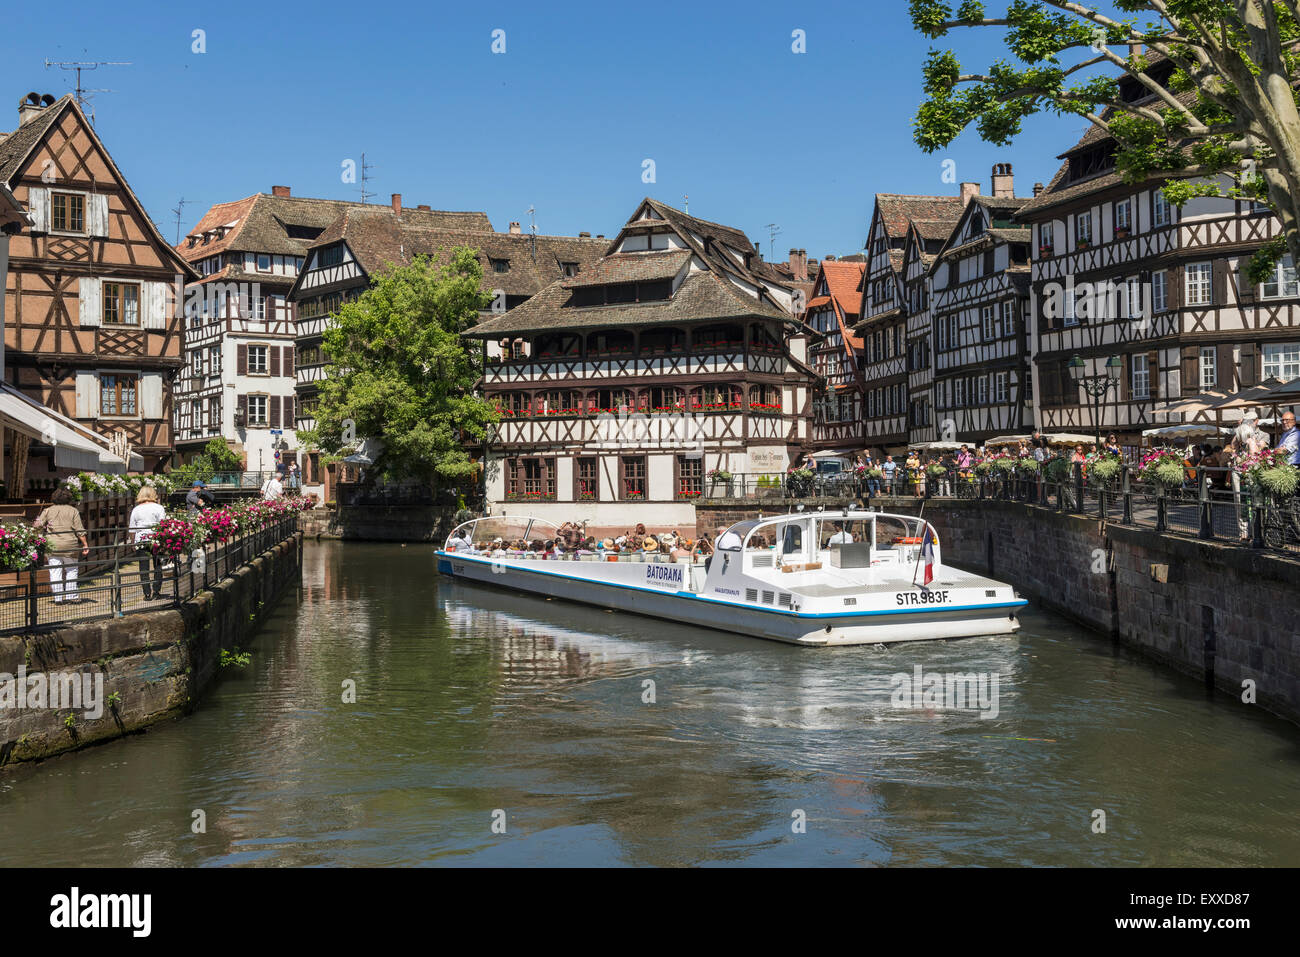 Tourist boat in La Petite France old town, Strasbourg, France, Europe Stock Photo